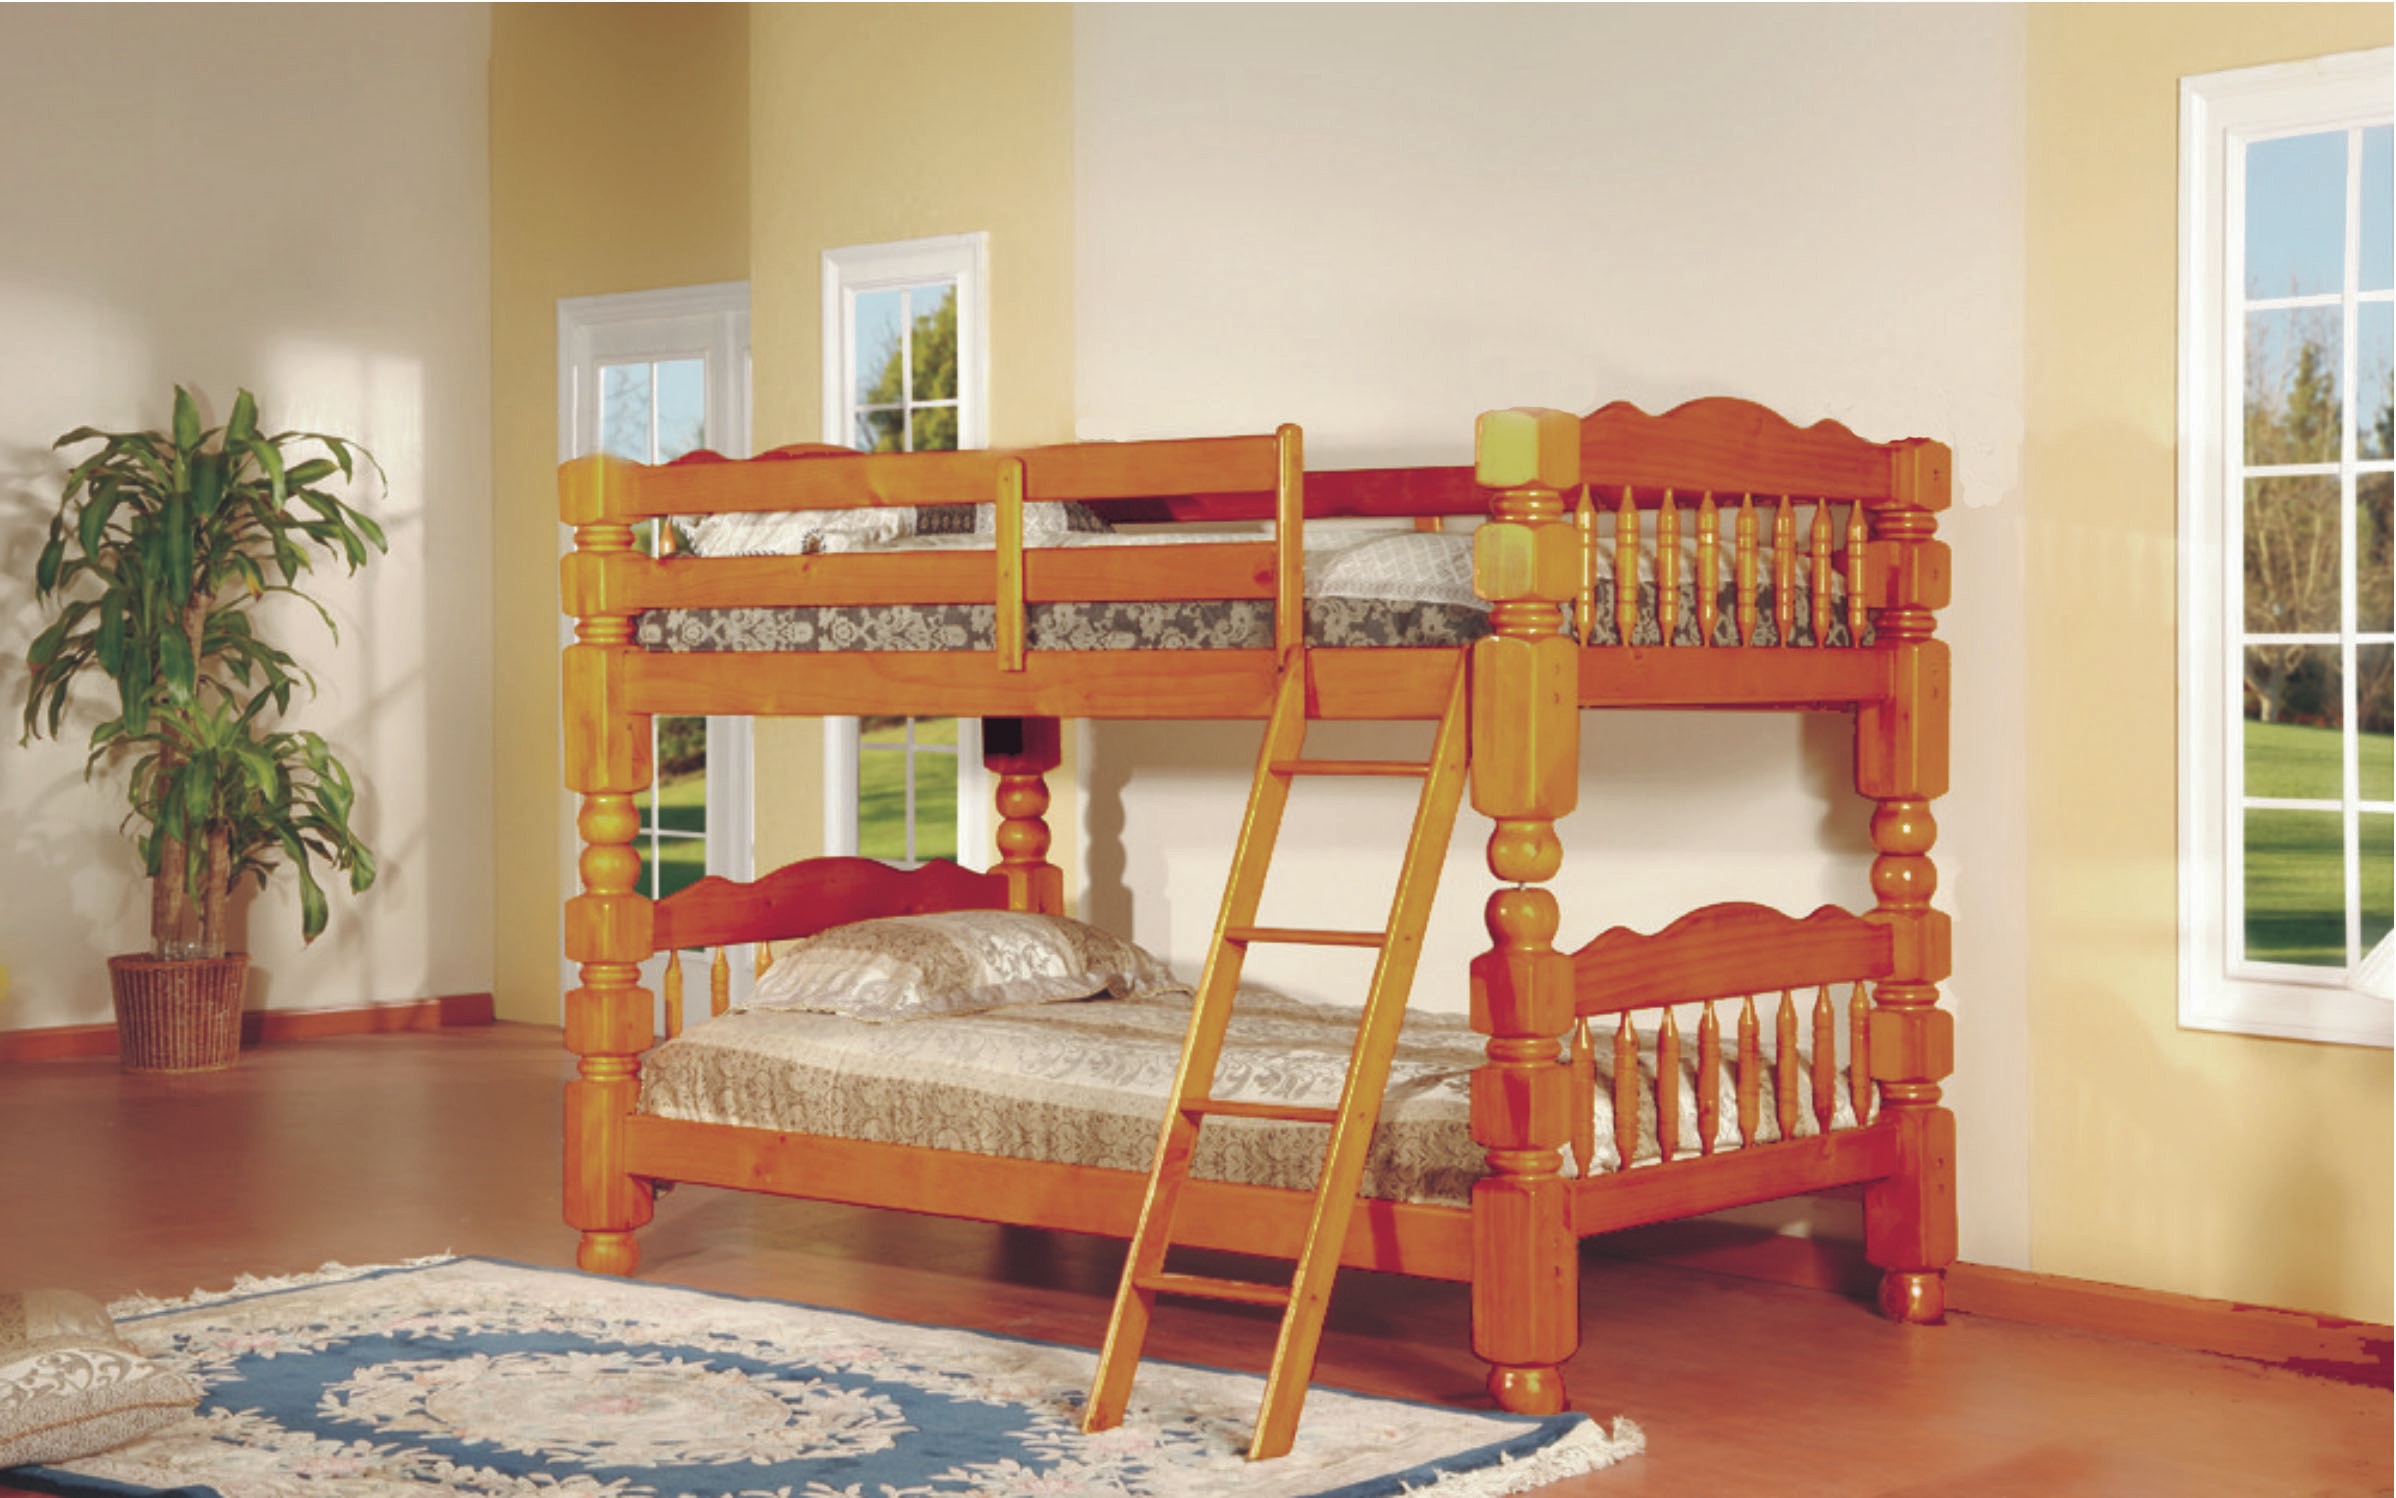 twin bunk beds that can separate